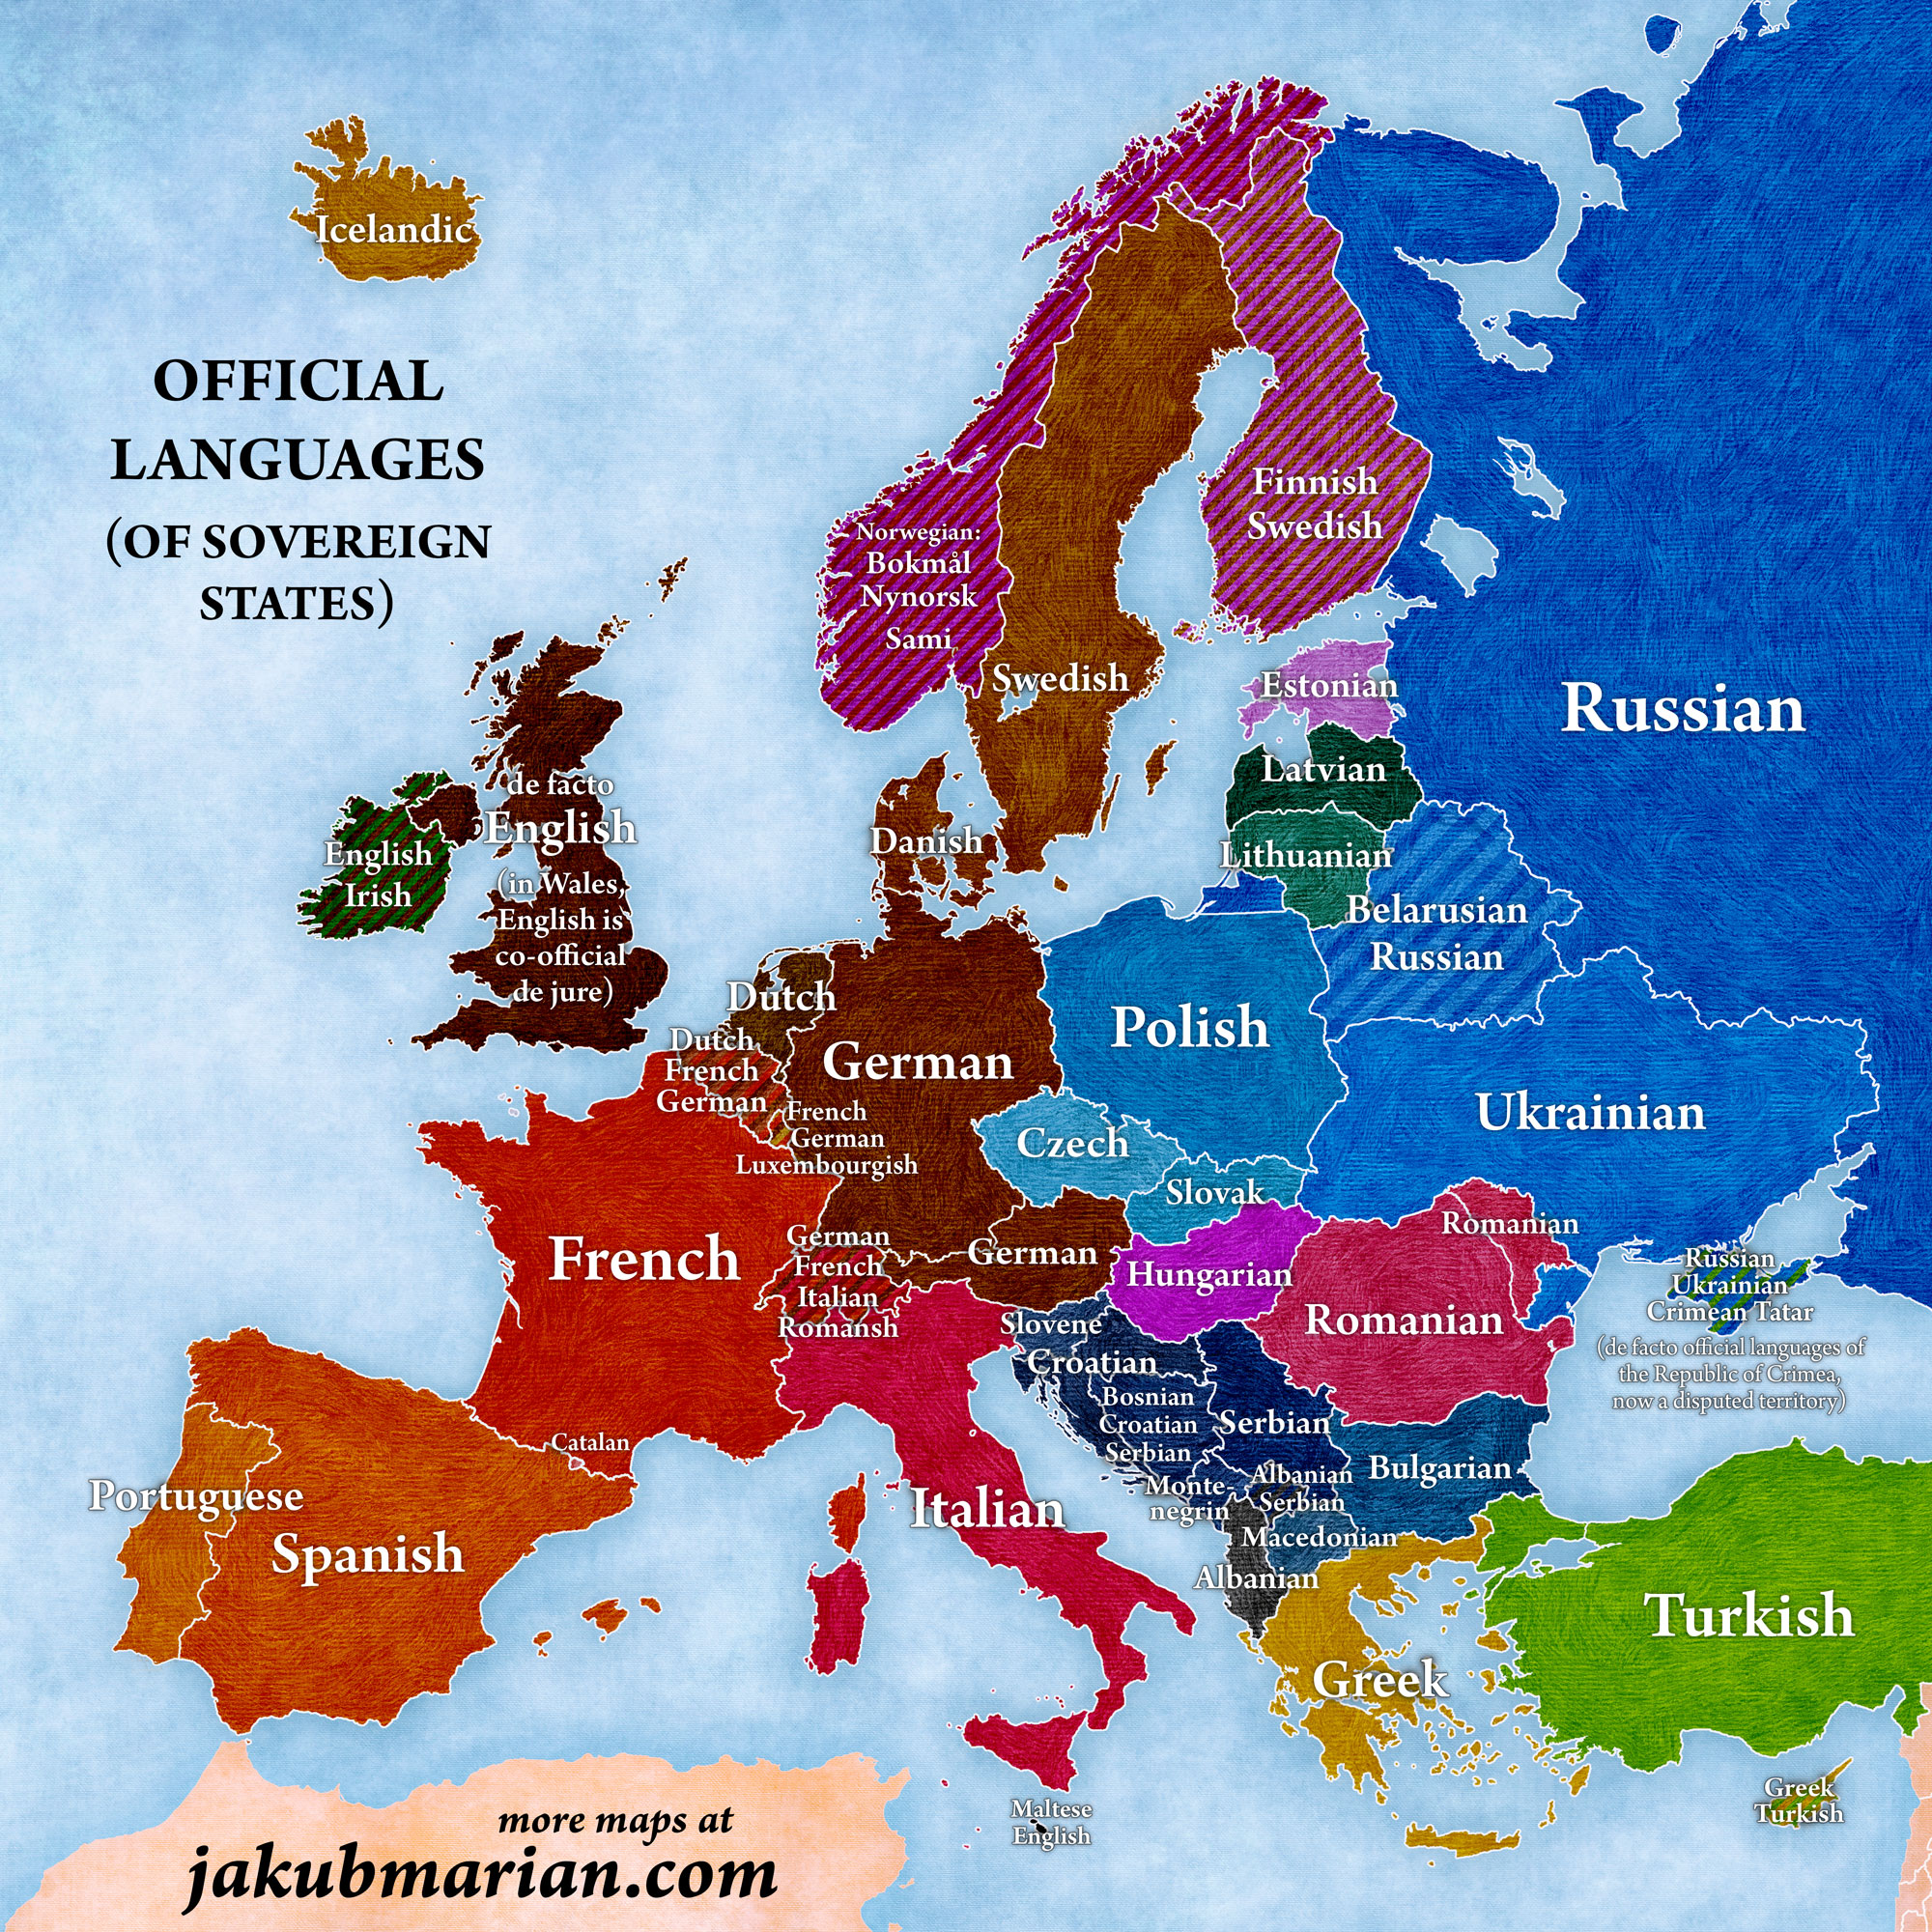 Map of Europe showing official languages by country